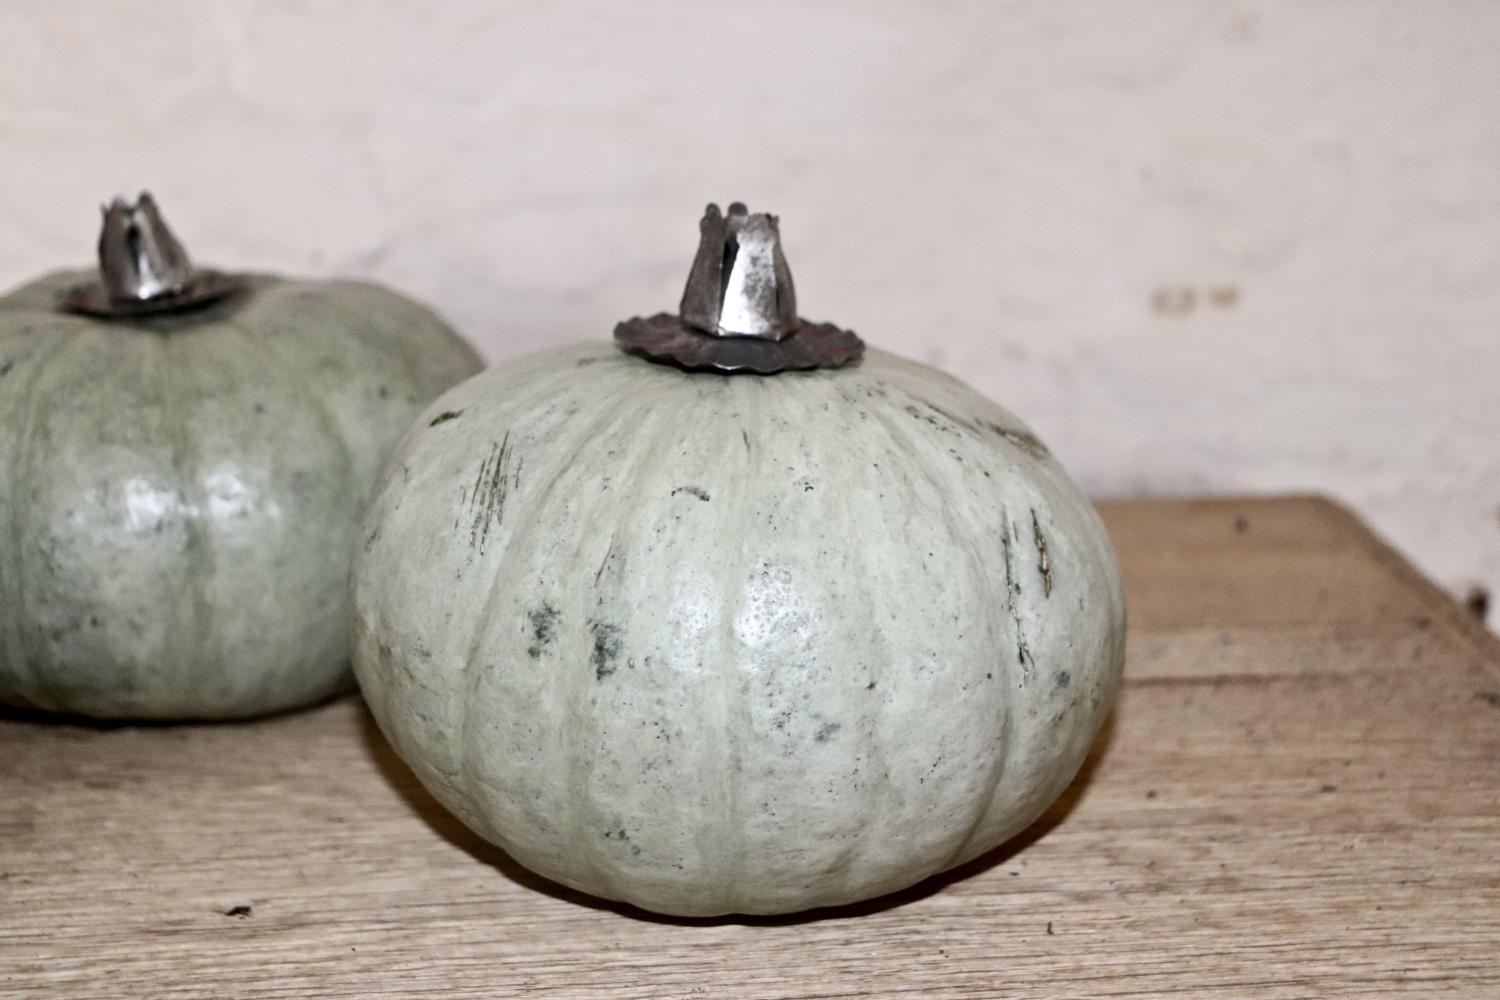 Pumpkins with 19th century candle inserts